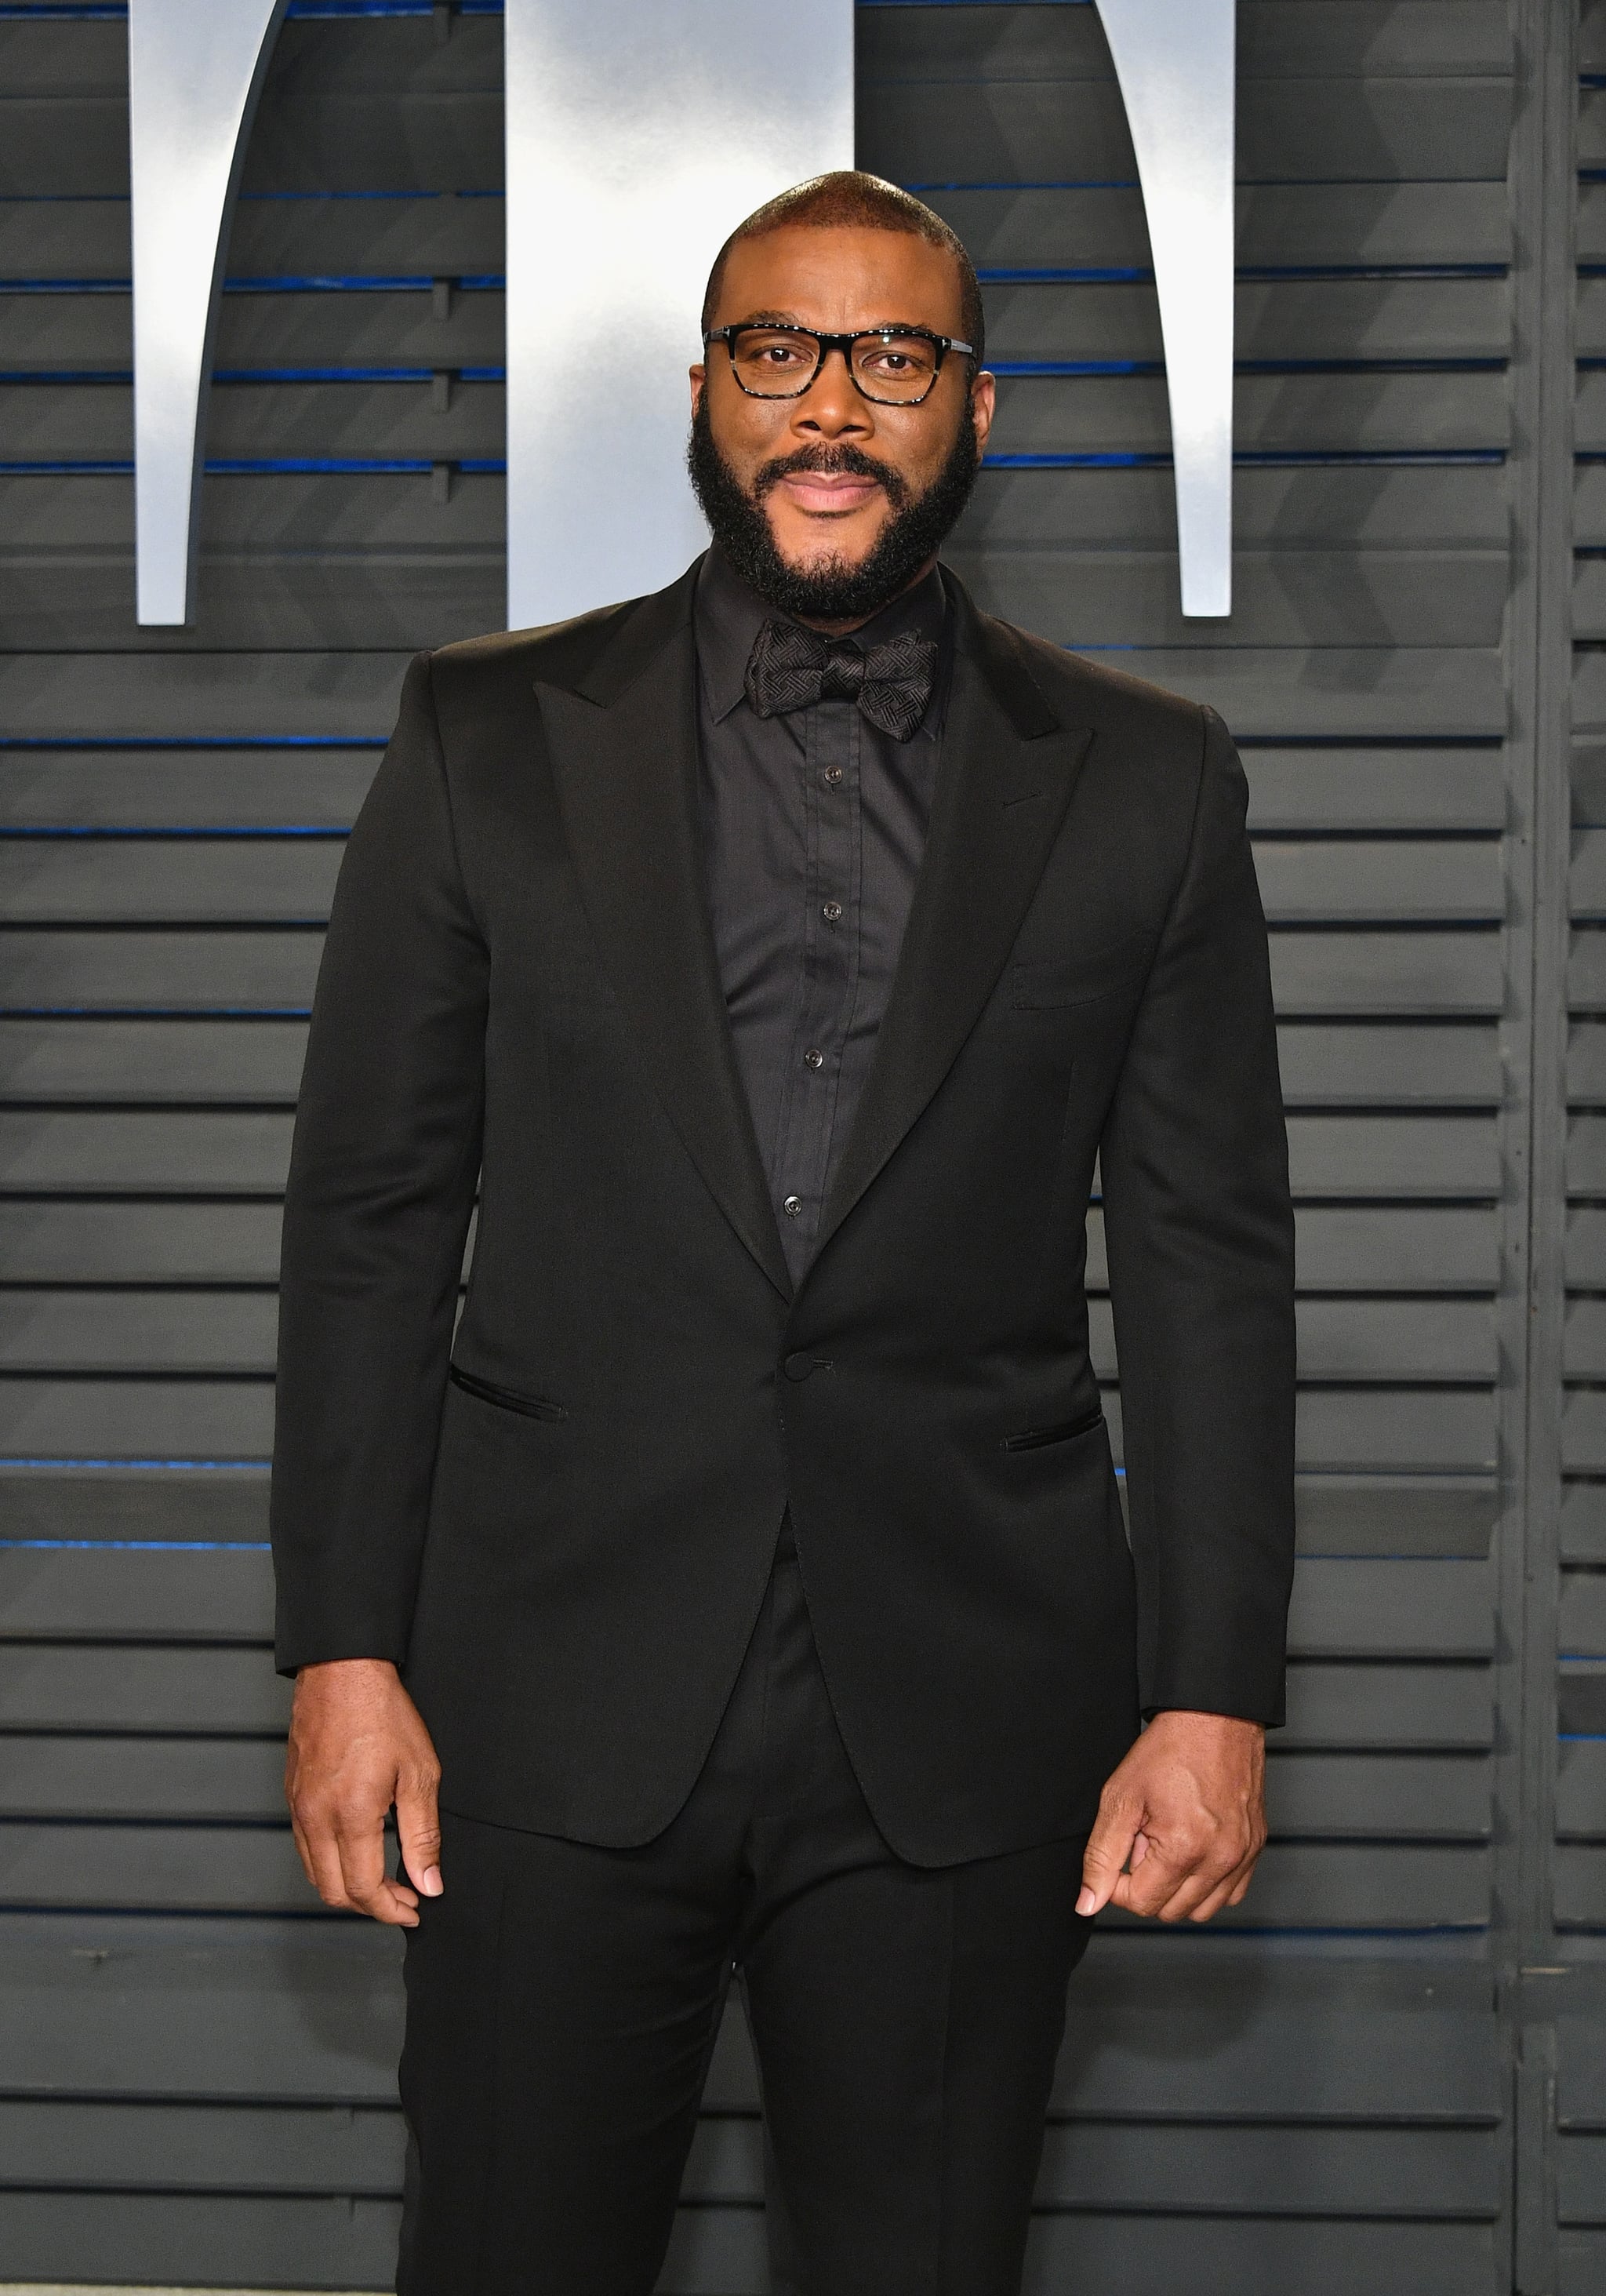 BEVERLY HILLS, CA - MARCH 04: Tyler Perry attends the 2018 Vanity Fair Oscar Party hosted by Radhika Jones at Wallis Annenberg Center for the Performing Arts on March 4, 2018 in Beverly Hills, California.  (Photo by Dia Dipasupil/Getty Images)